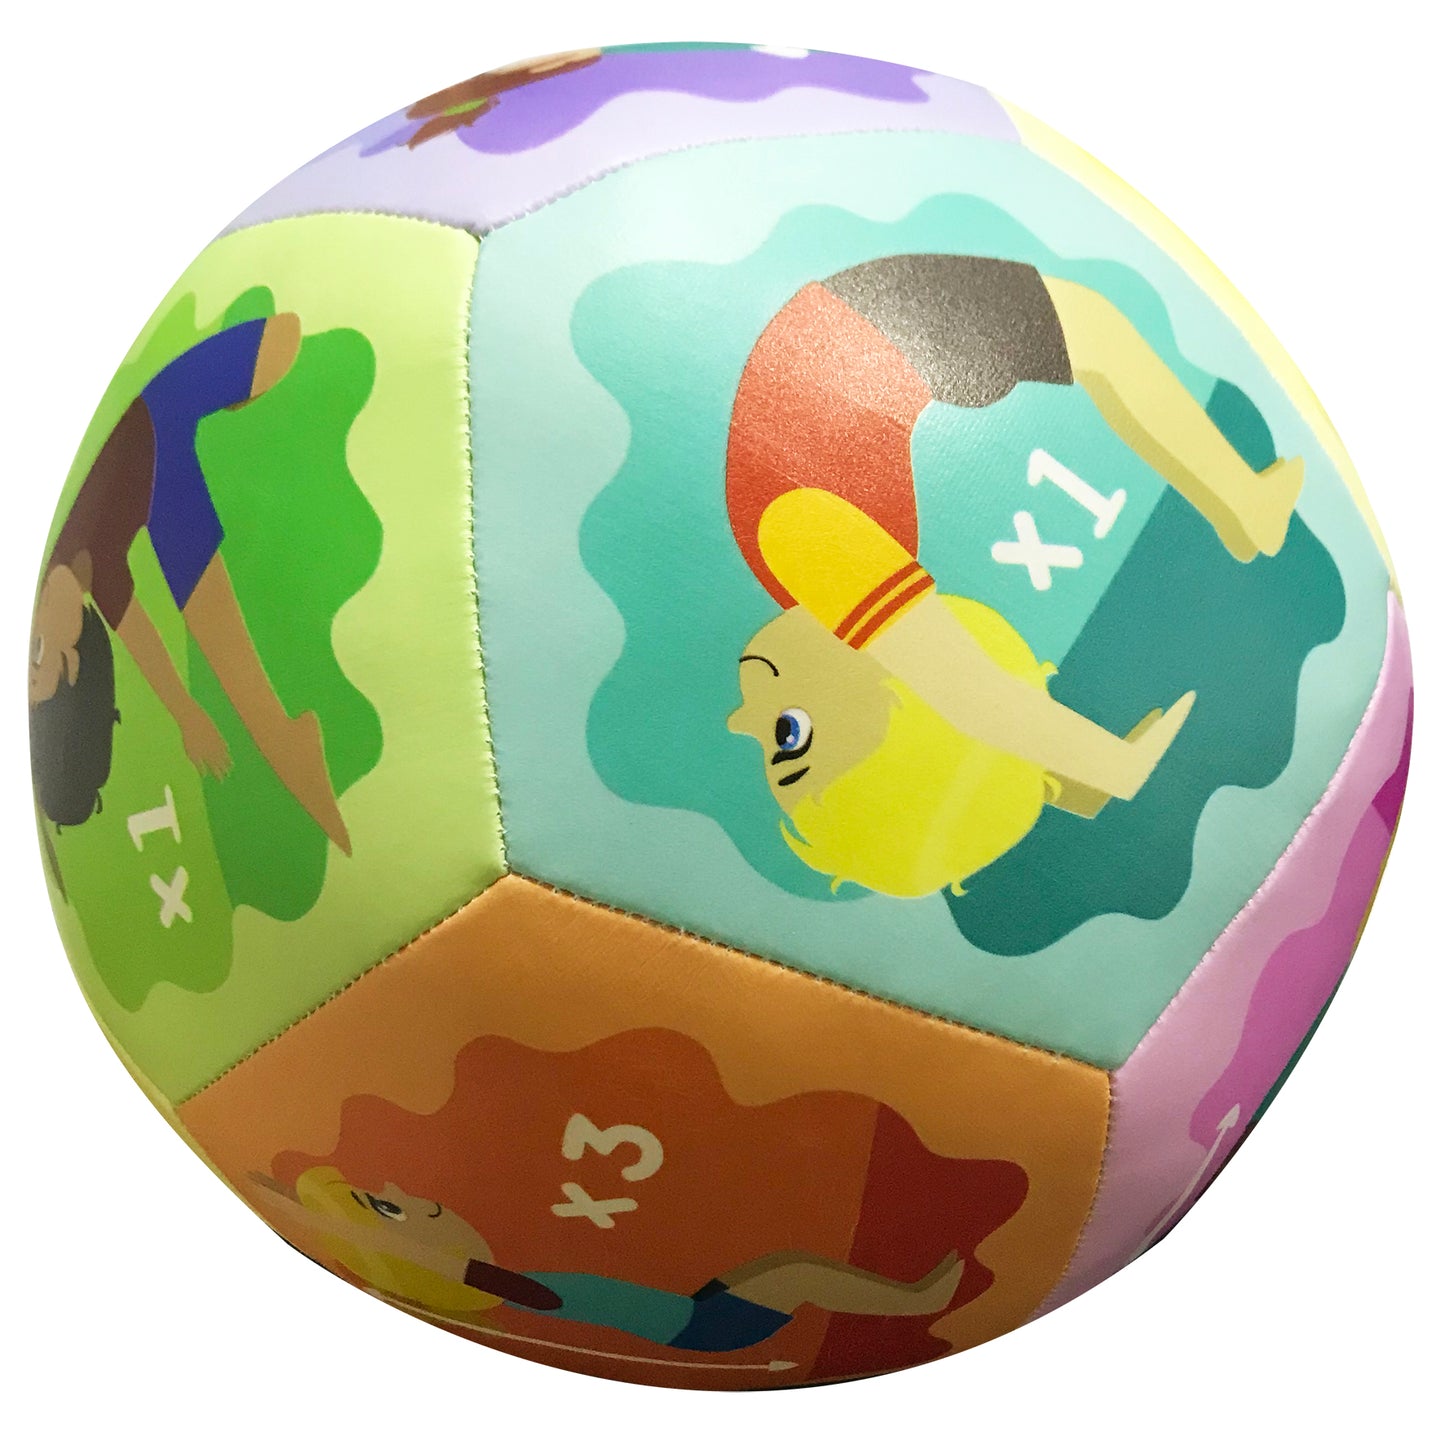 Activity Ball for kids